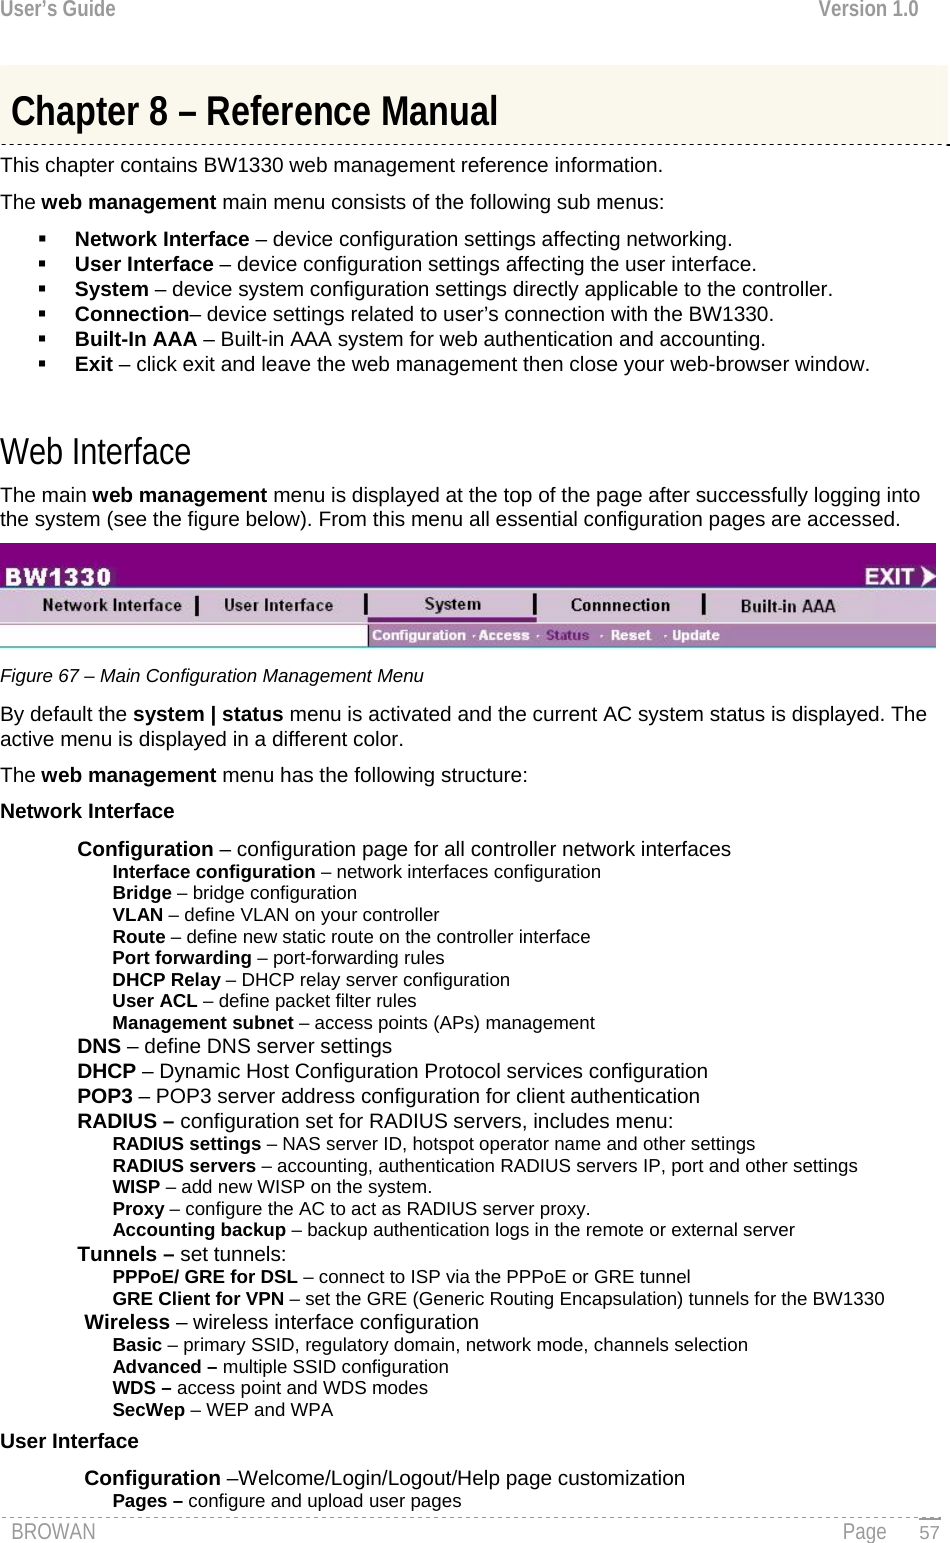 User’s Guide  Version 1.0  Chapter 8 – Reference Manual This chapter contains BW1330 web management reference information. The web management main menu consists of the following sub menus:  Network Interface – device configuration settings affecting networking.  User Interface – device configuration settings affecting the user interface.  System – device system configuration settings directly applicable to the controller.  Connection– device settings related to user’s connection with the BW1330.  Built-In AAA – Built-in AAA system for web authentication and accounting.  Exit – click exit and leave the web management then close your web-browser window.  Web Interface The main web management menu is displayed at the top of the page after successfully logging into the system (see the figure below). From this menu all essential configuration pages are accessed.  Figure 67 – Main Configuration Management Menu By default the system | status menu is activated and the current AC system status is displayed. The active menu is displayed in a different color.  The web management menu has the following structure: Network Interface Configuration – configuration page for all controller network interfaces Interface configuration – network interfaces configuration Bridge – bridge configuration VLAN – define VLAN on your controller Route – define new static route on the controller interface Port forwarding – port-forwarding rules DHCP Relay – DHCP relay server configuration User ACL – define packet filter rules Management subnet – access points (APs) management  DNS – define DNS server settings DHCP – Dynamic Host Configuration Protocol services configuration POP3 – POP3 server address configuration for client authentication RADIUS – configuration set for RADIUS servers, includes menu: RADIUS settings – NAS server ID, hotspot operator name and other settings RADIUS servers – accounting, authentication RADIUS servers IP, port and other settings WISP – add new WISP on the system. Proxy – configure the AC to act as RADIUS server proxy. Accounting backup – backup authentication logs in the remote or external server Tunnels – set tunnels: PPPoE/ GRE for DSL – connect to ISP via the PPPoE or GRE tunnel GRE Client for VPN – set the GRE (Generic Routing Encapsulation) tunnels for the BW1330 Wireless – wireless interface configuration Basic – primary SSID, regulatory domain, network mode, channels selection Advanced – multiple SSID configuration WDS – access point and WDS modes SecWep – WEP and WPA User Interface Configuration –Welcome/Login/Logout/Help page customization Pages – configure and upload user pages BROWAN                                                                                                                                               Page   57